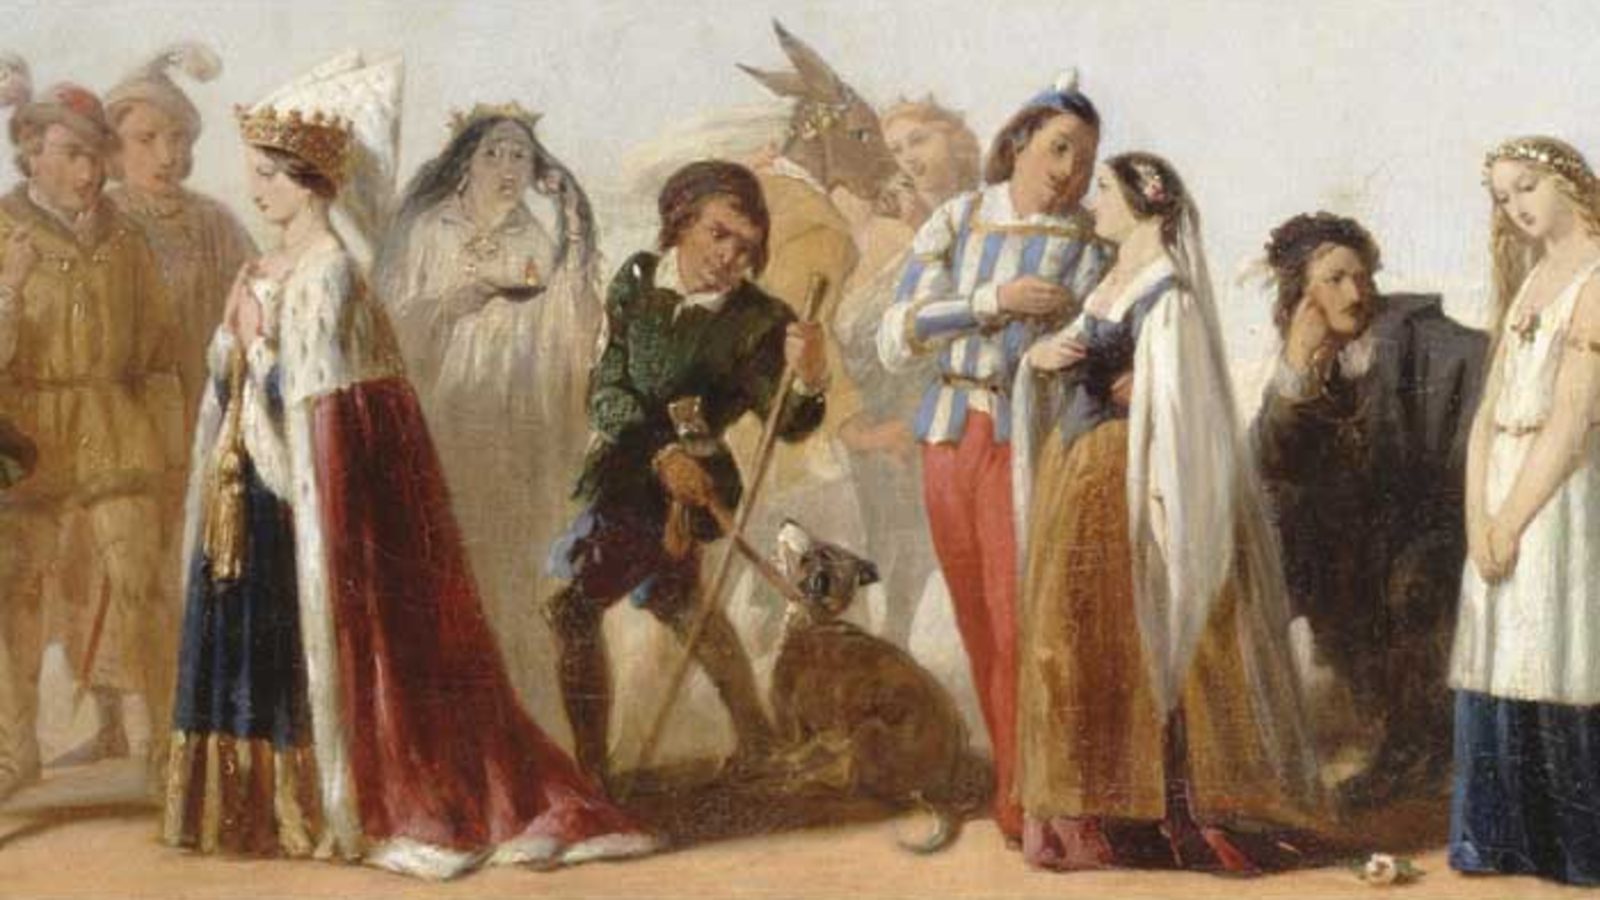 Image of Shakespeare characters